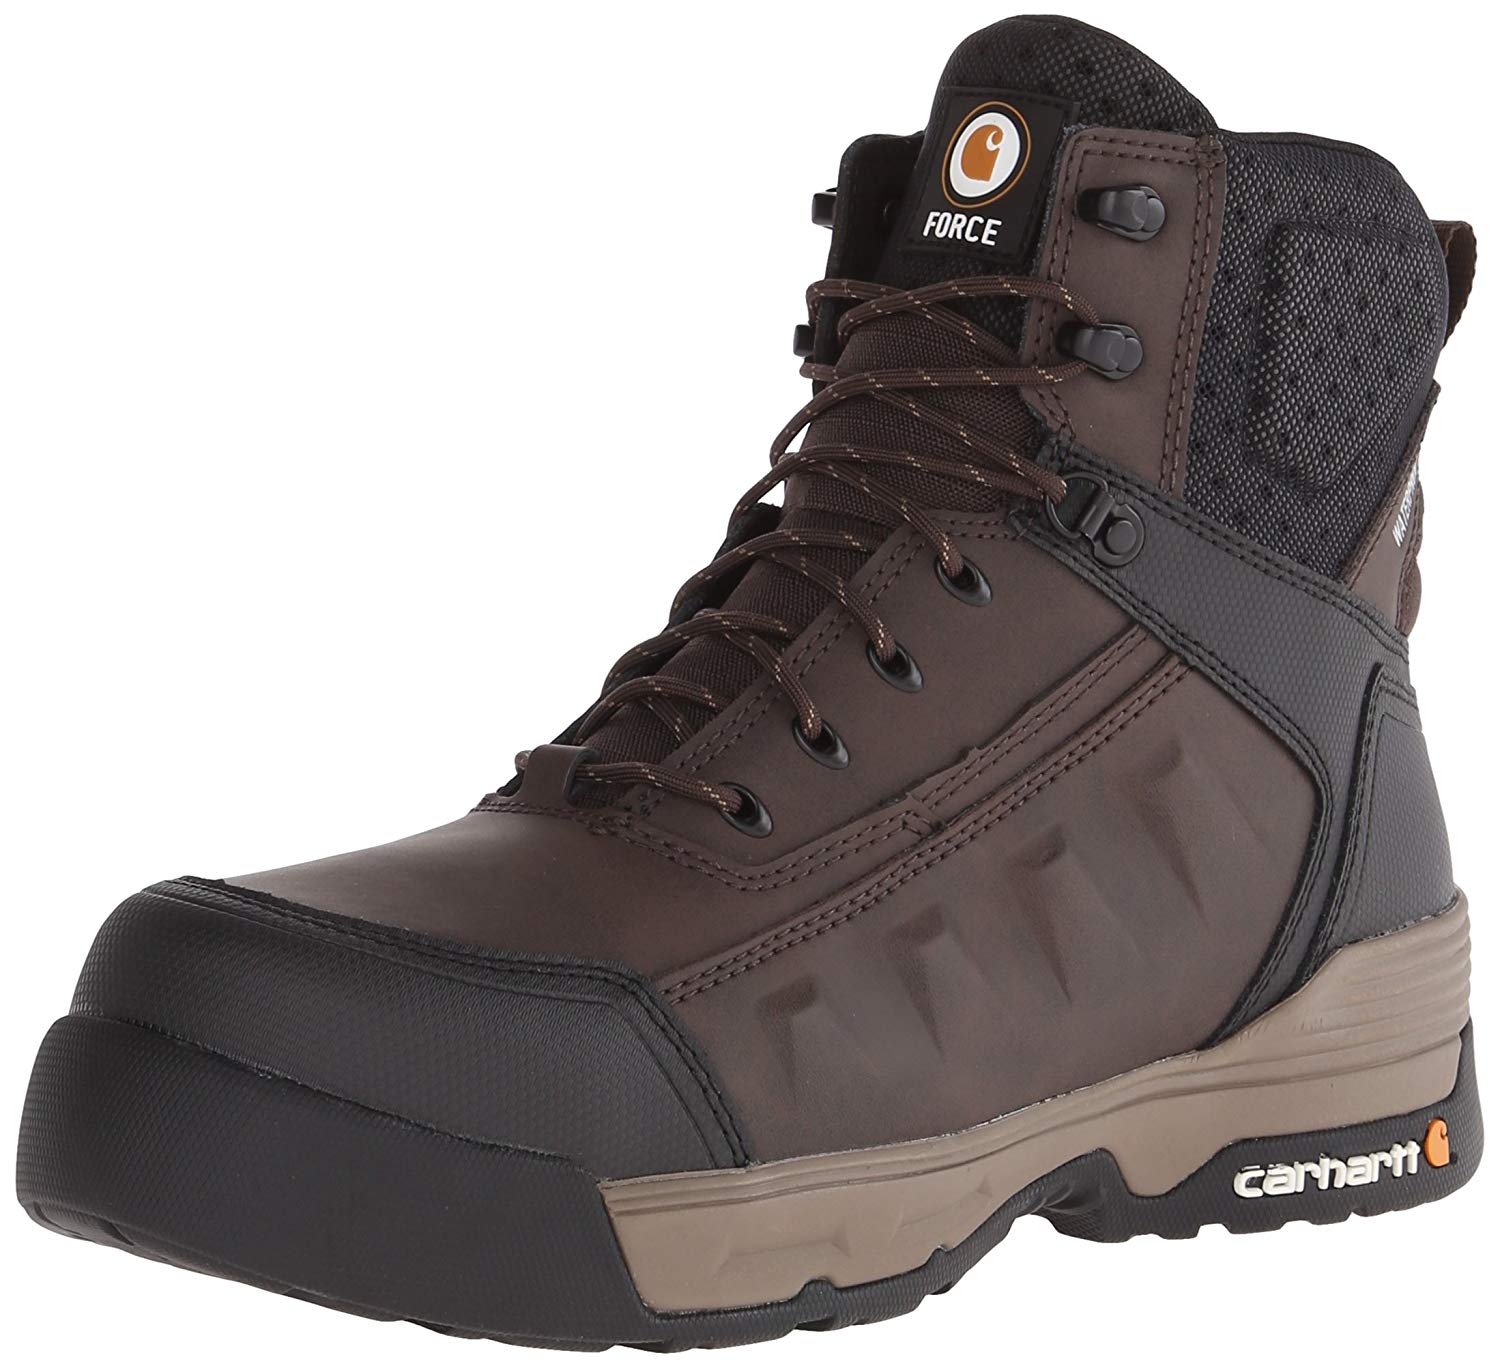 Carhartt Mens 6 Force Closed Toe Mid Calf Safety Boots Brown Size 95 Dk8d Ebay 